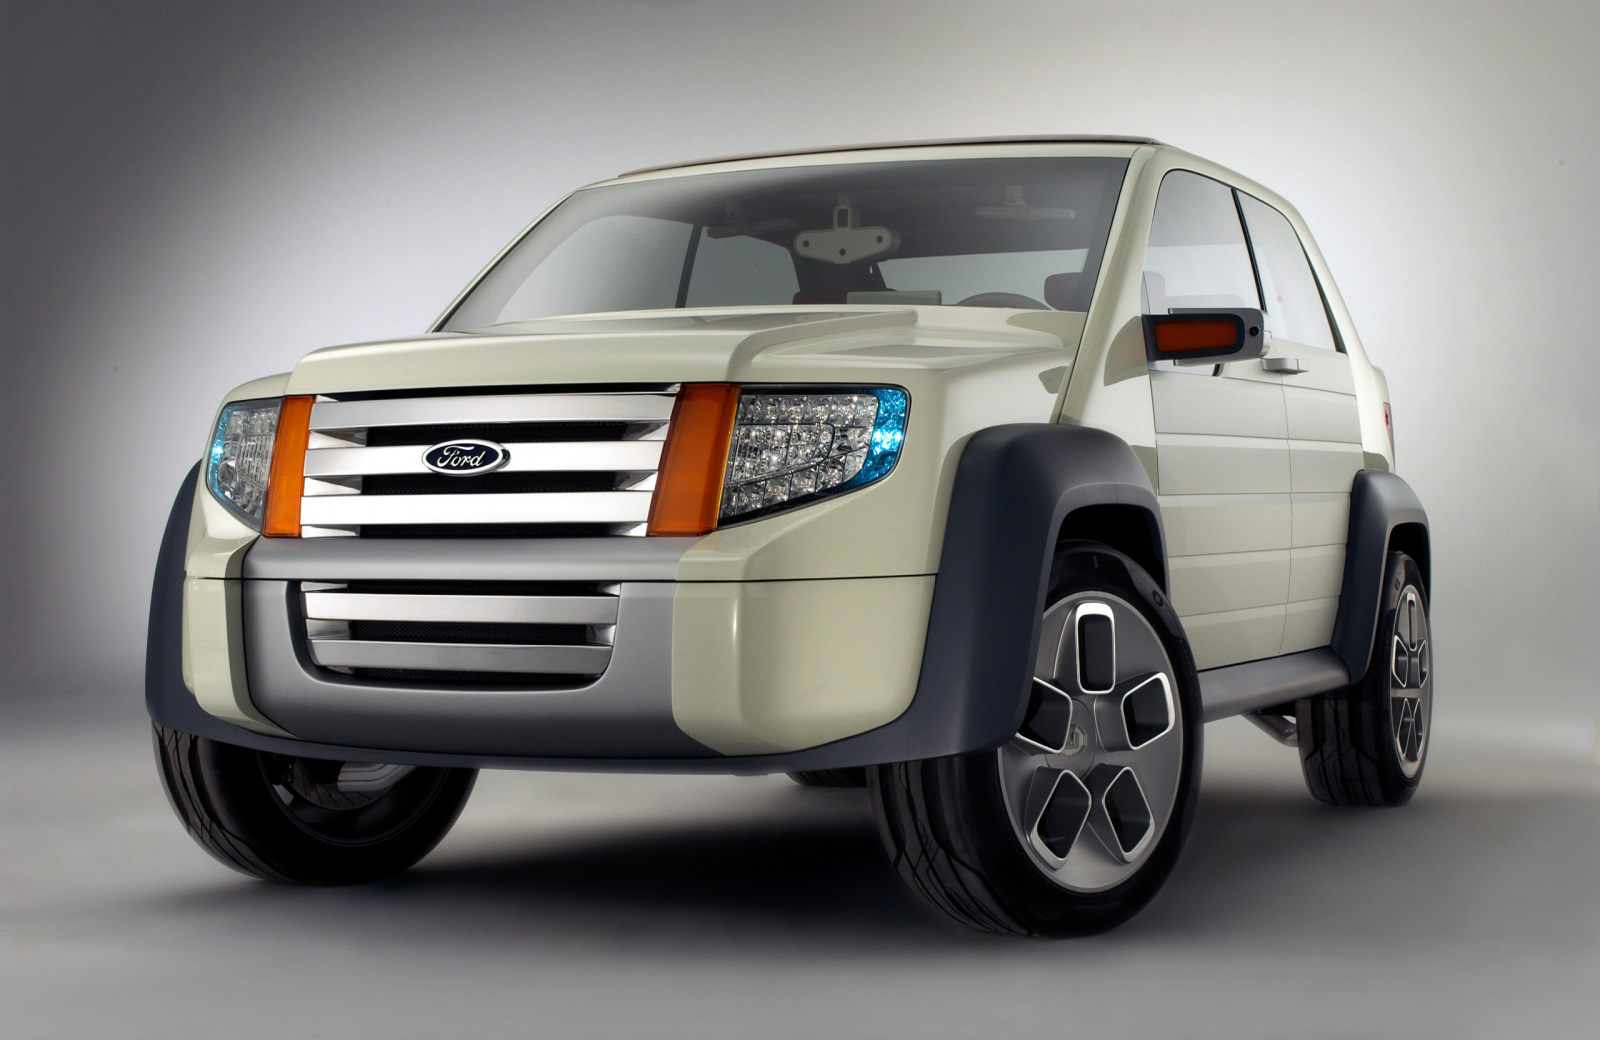 Ford Model U Concept - Foto eines Ford Concept-Cars